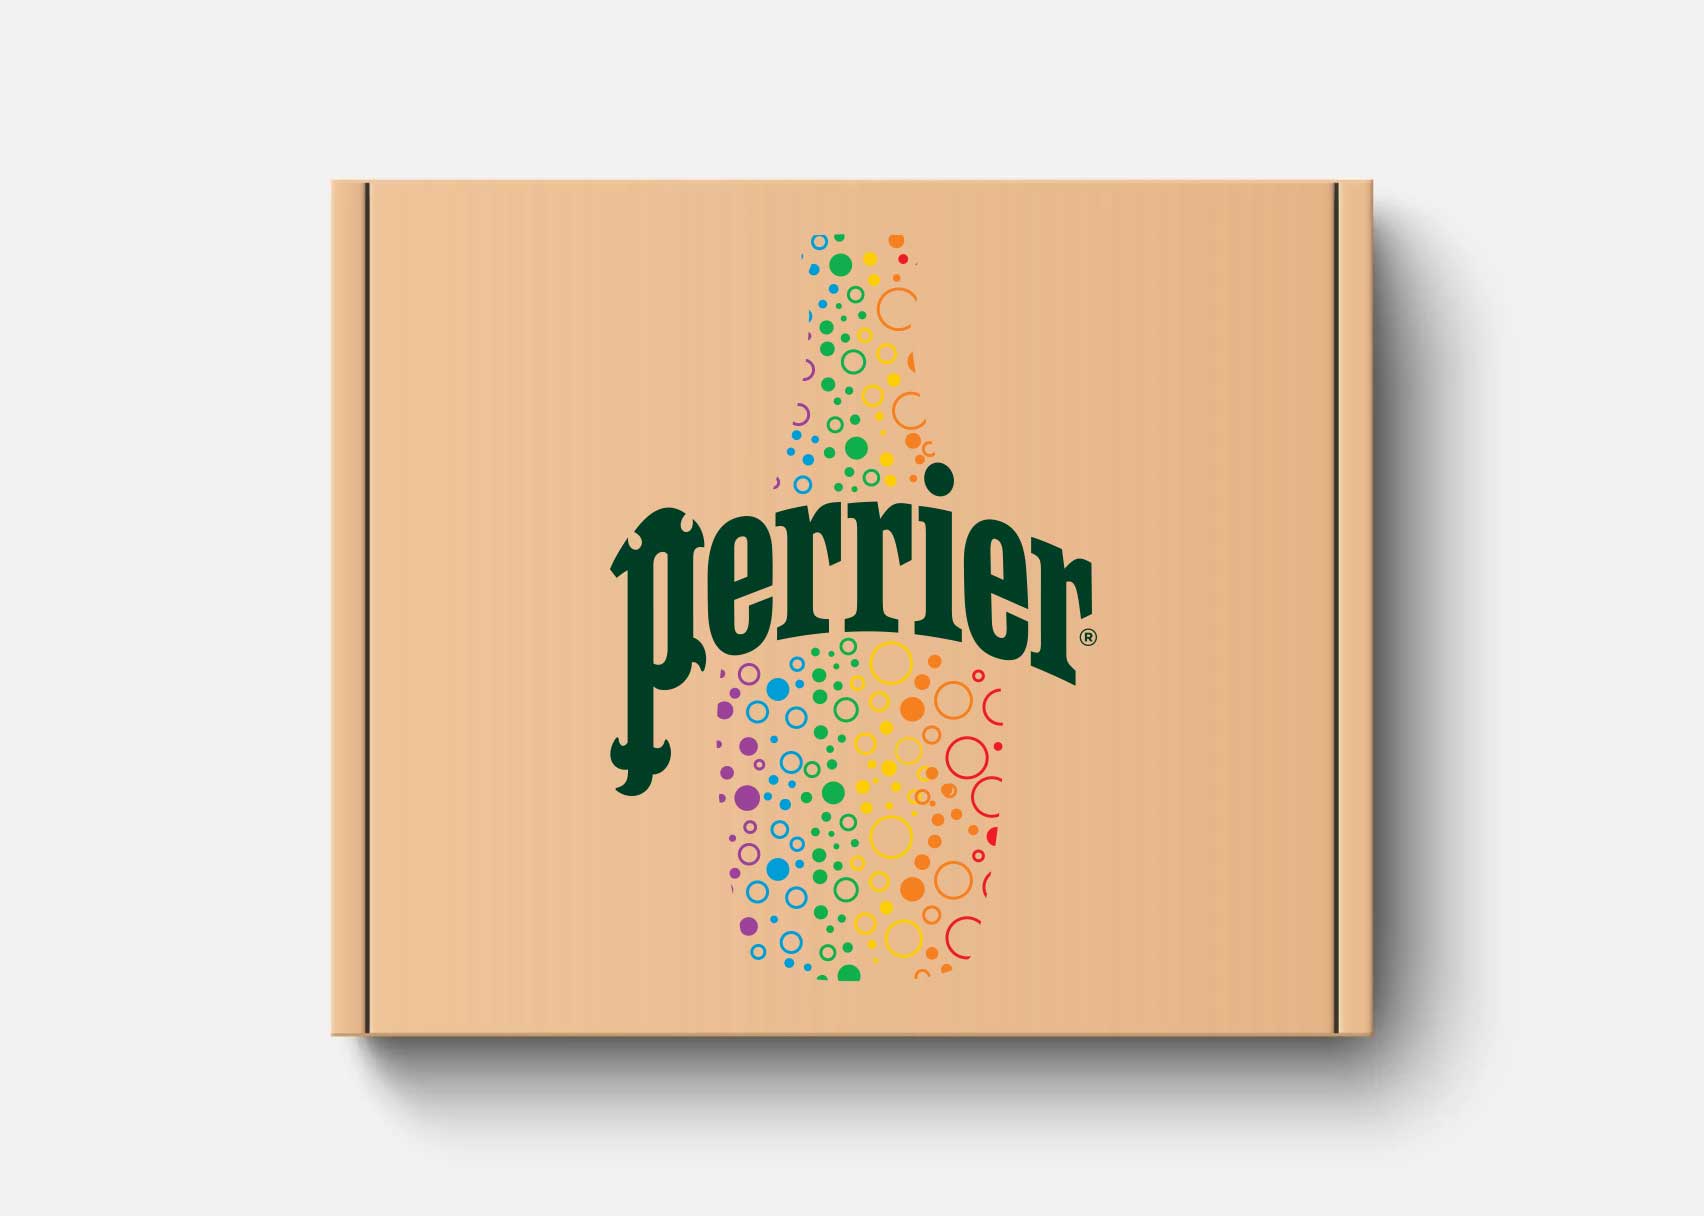 Pride month Mixology Kits curated by Gluttonomy for Perrier